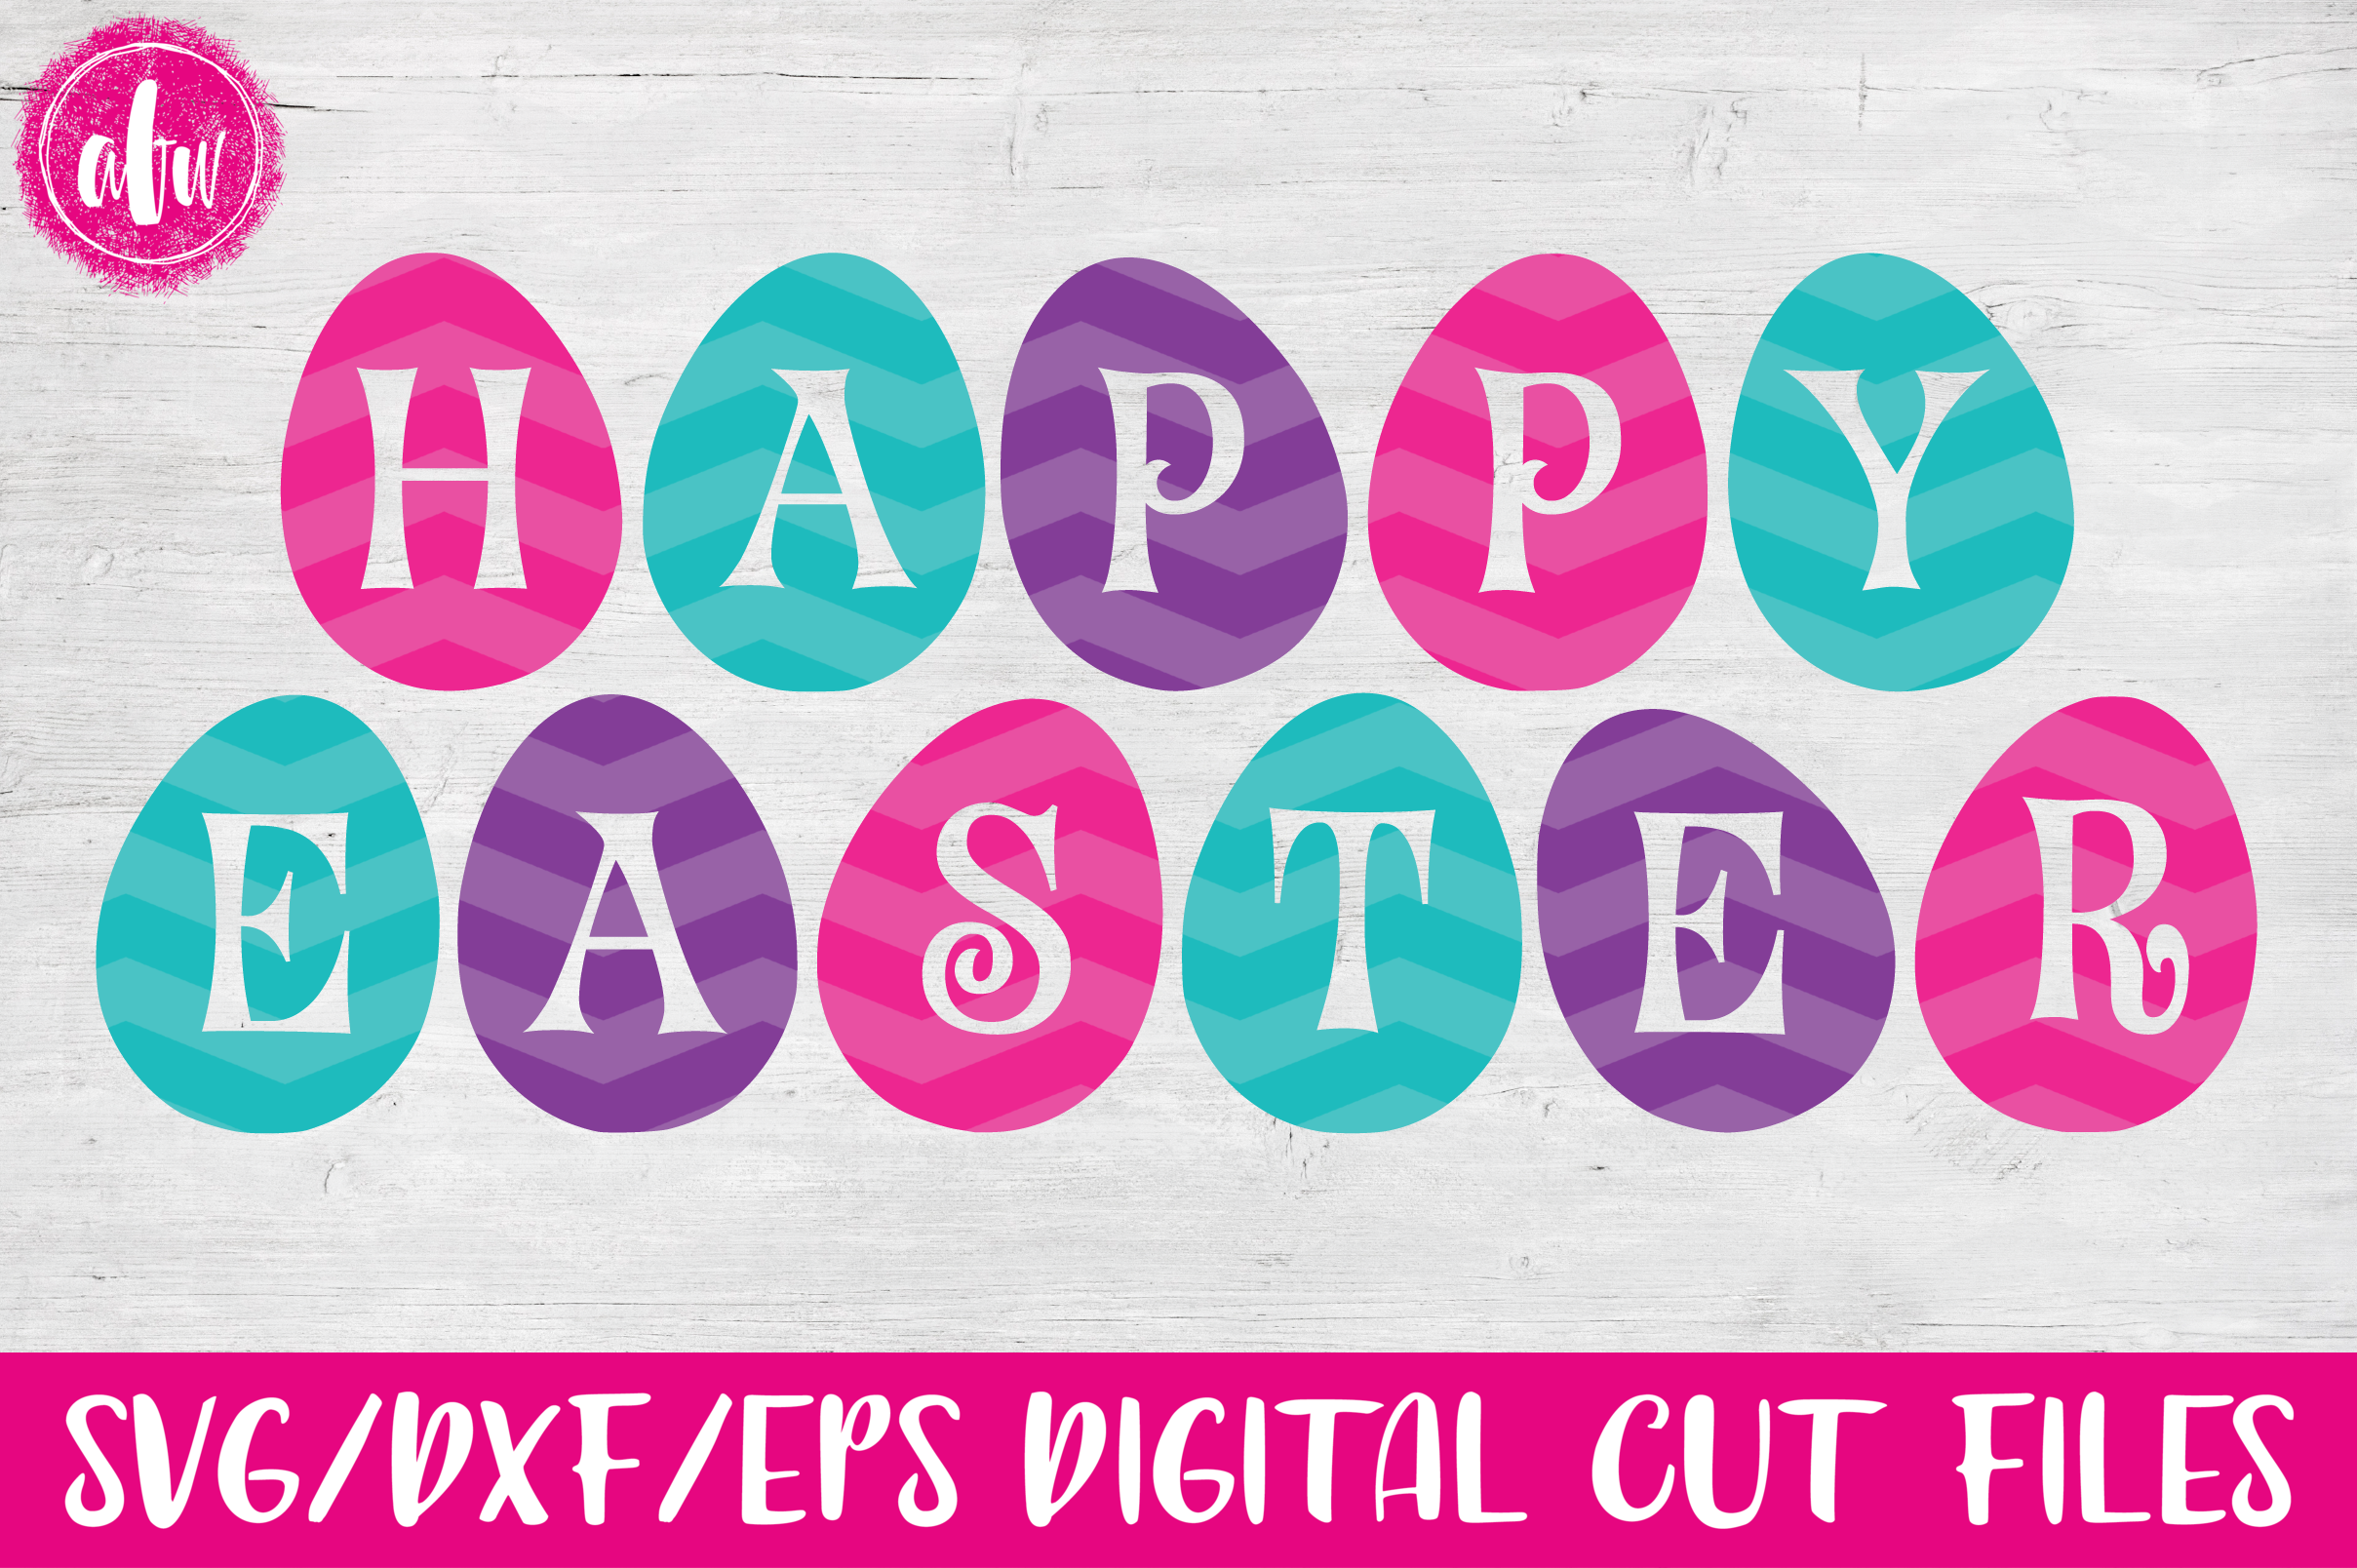 Download Happy Easter Eggs - SVG, DXF, EPS Cut Files